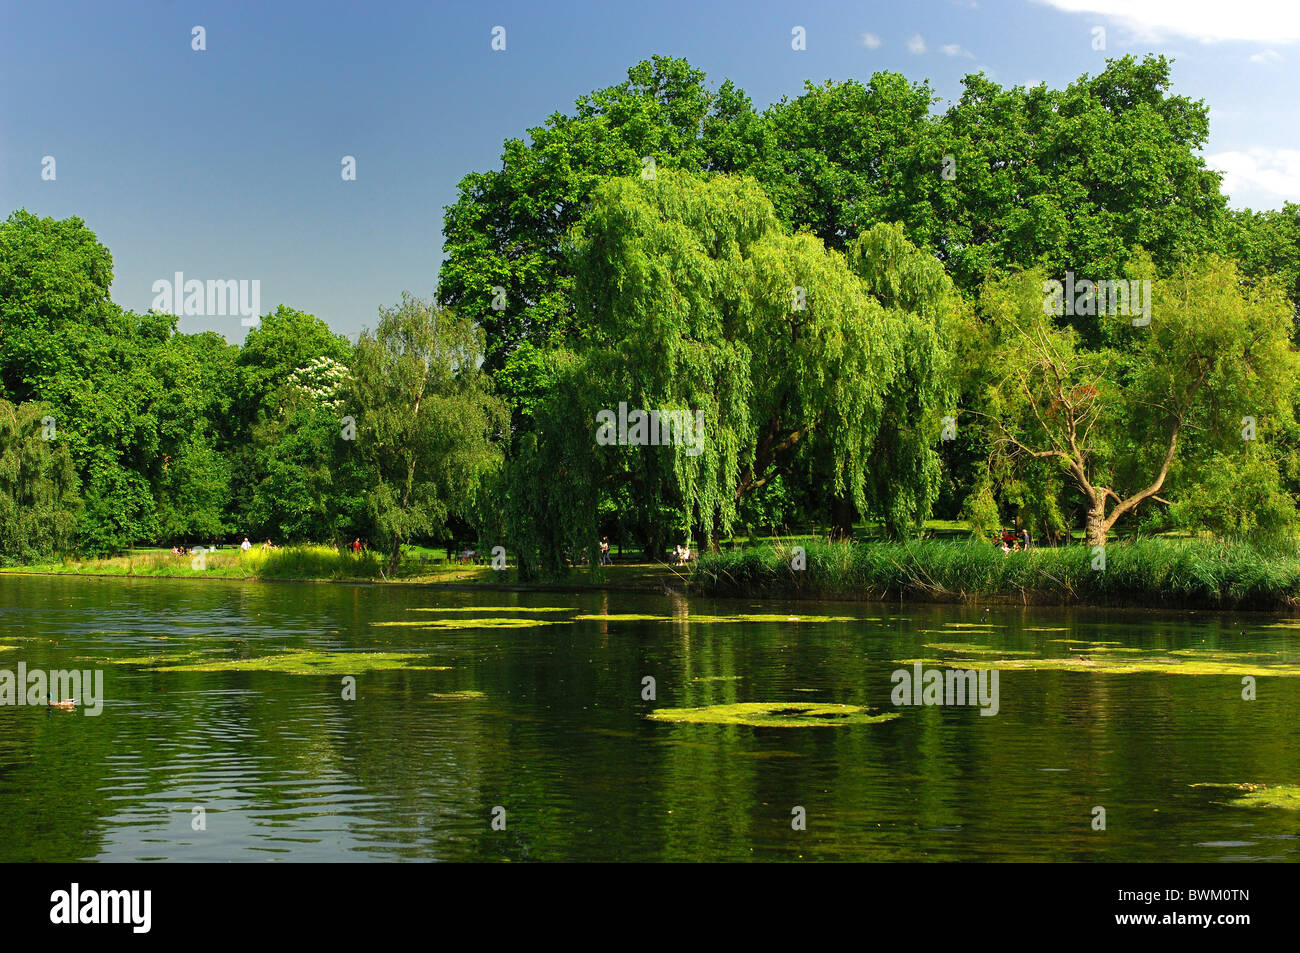 UK London St. James Park Strand Great Britain Europe England lake water trees green nature landscape town Stock Photo